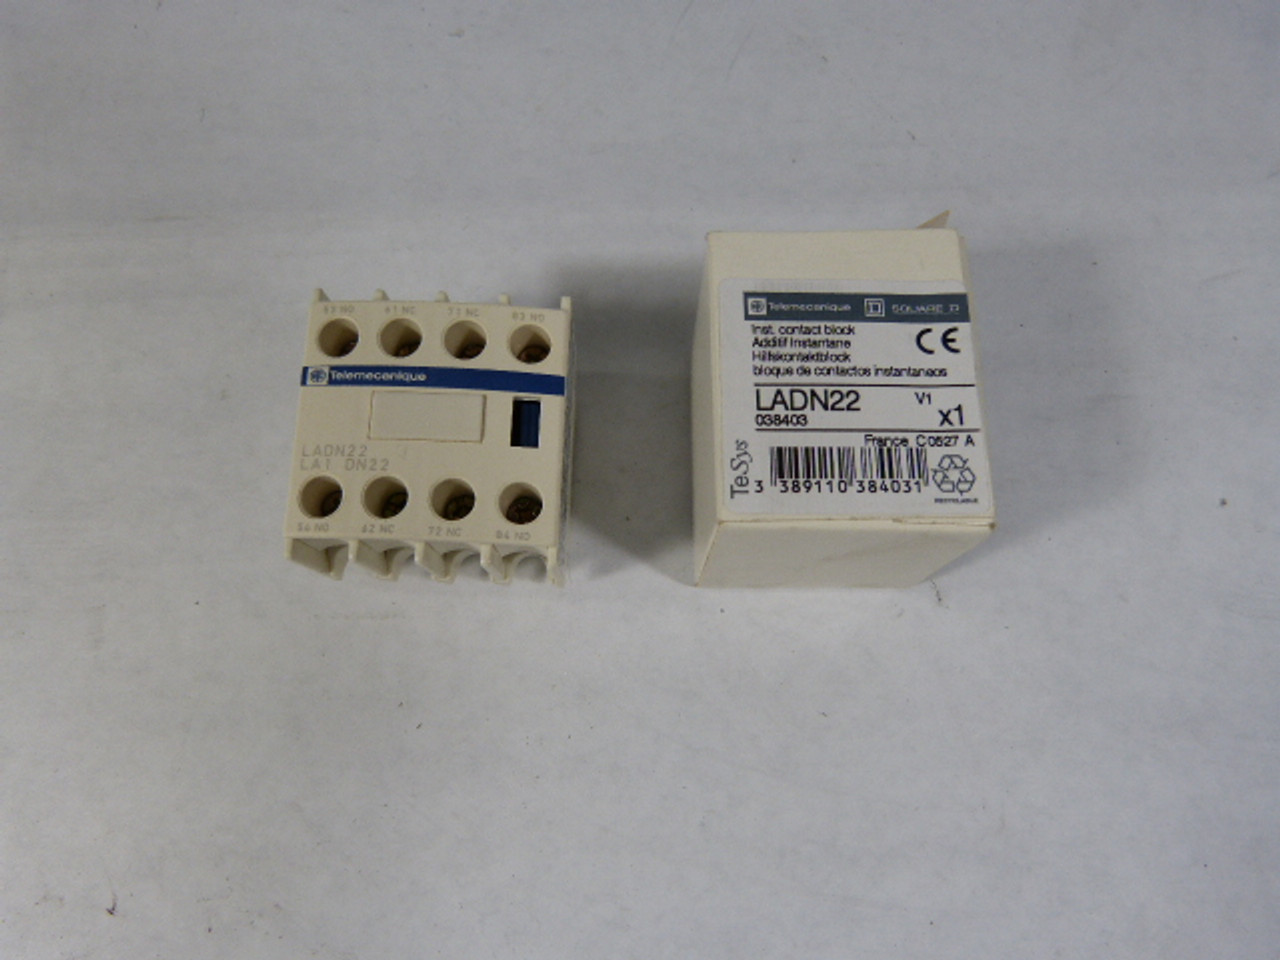 Telemecanique LADN22 Auxiliary Contact Block ! NEW !